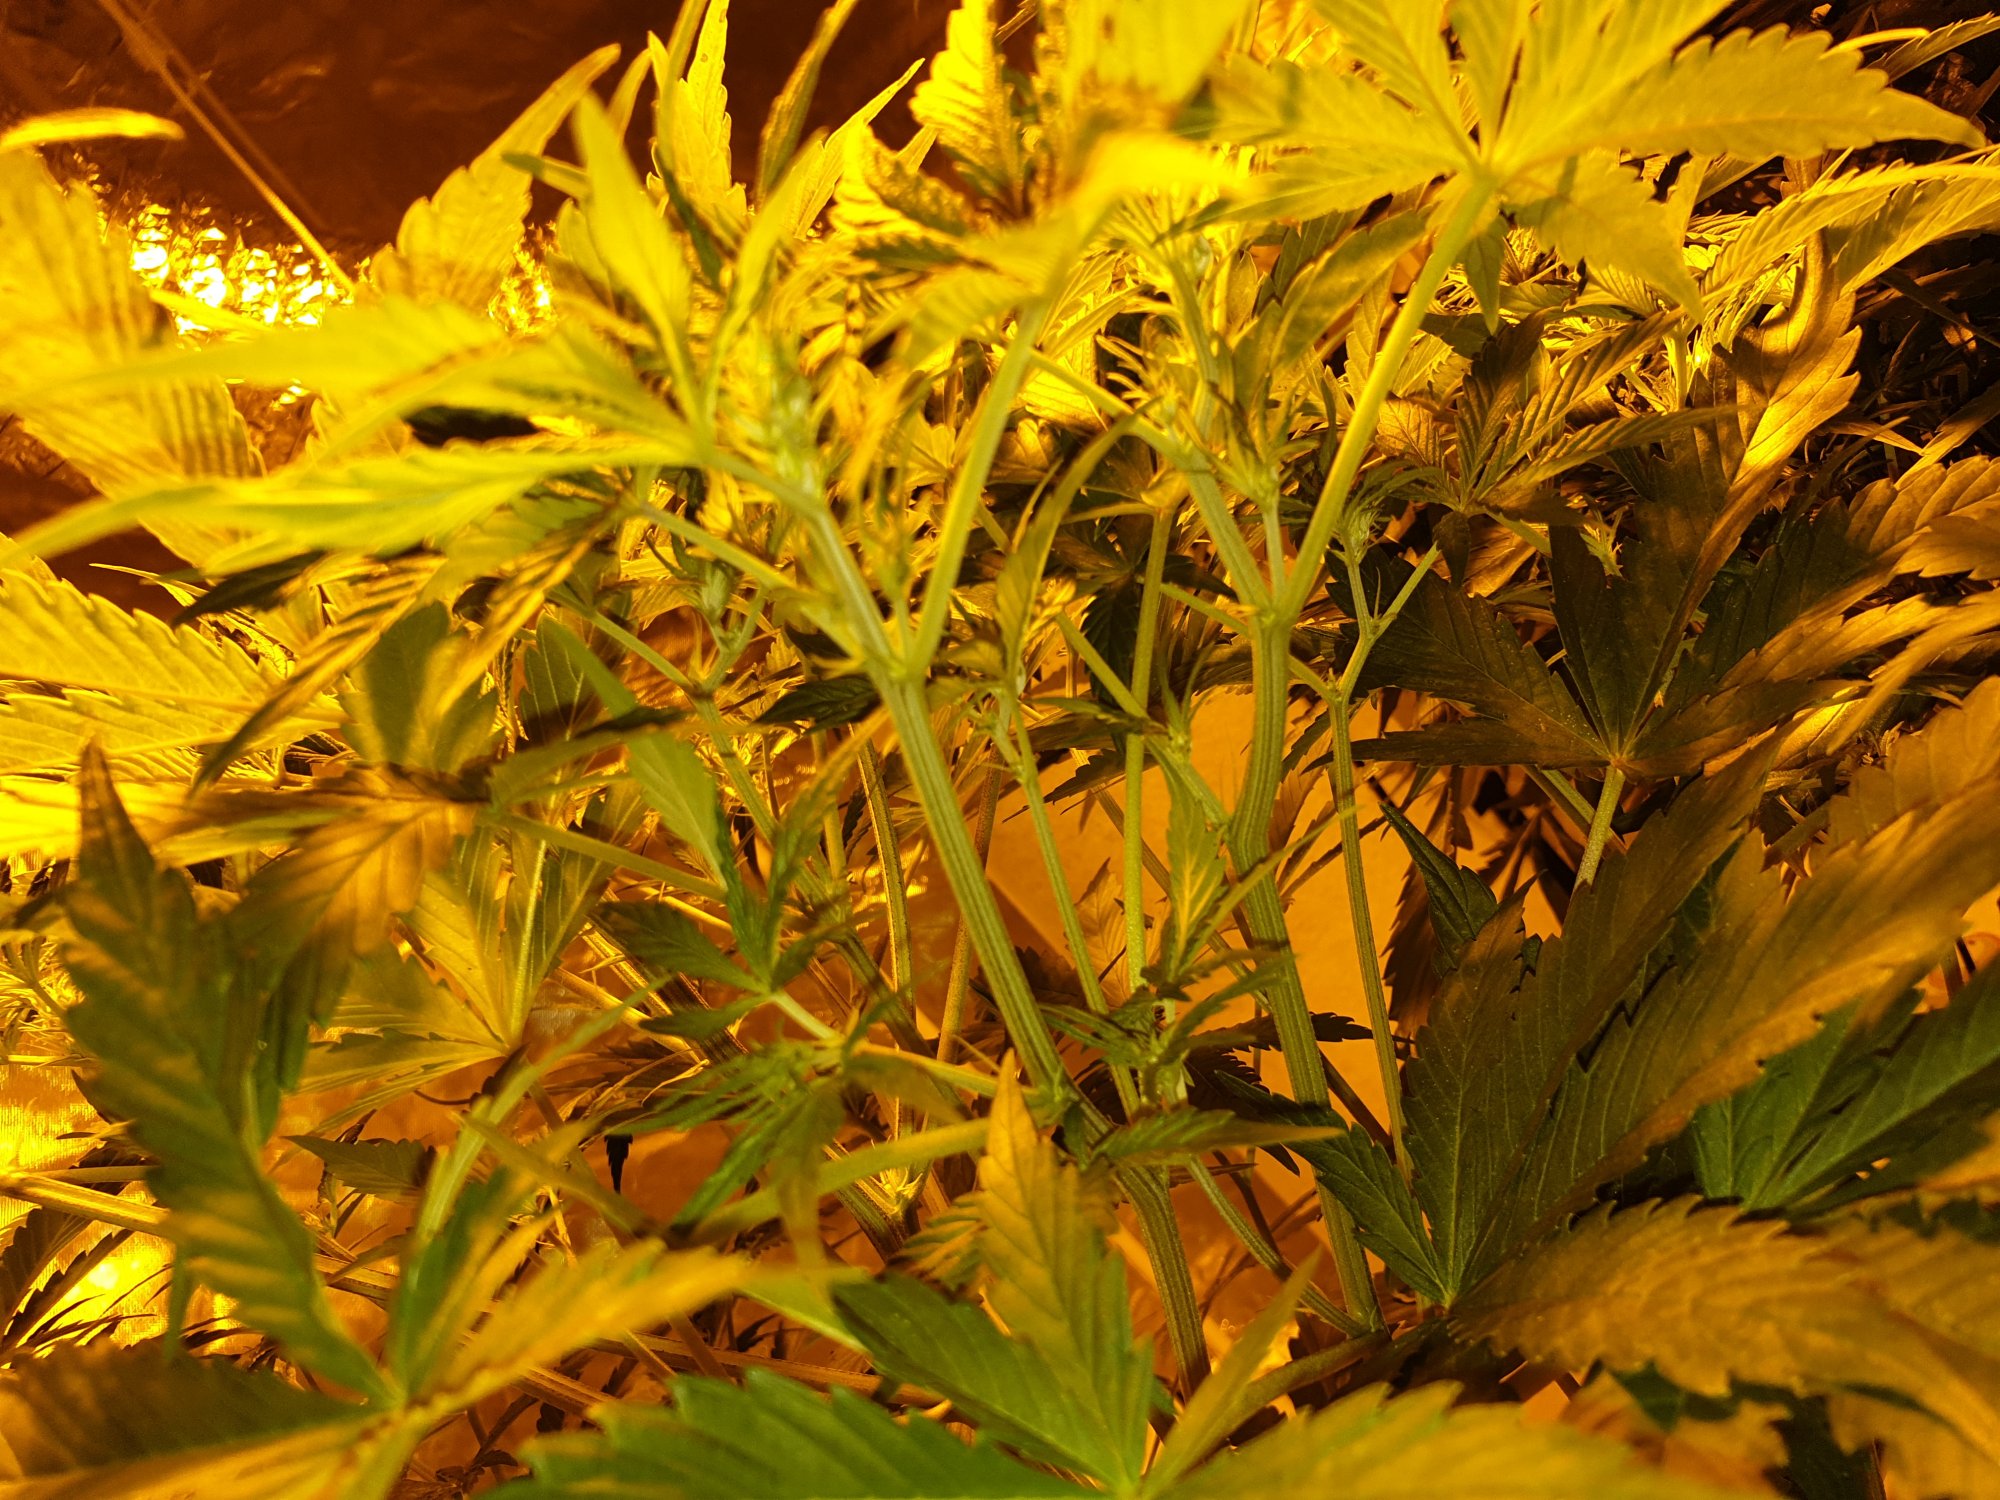 Wk 1 2 flower whats my deficiency 5